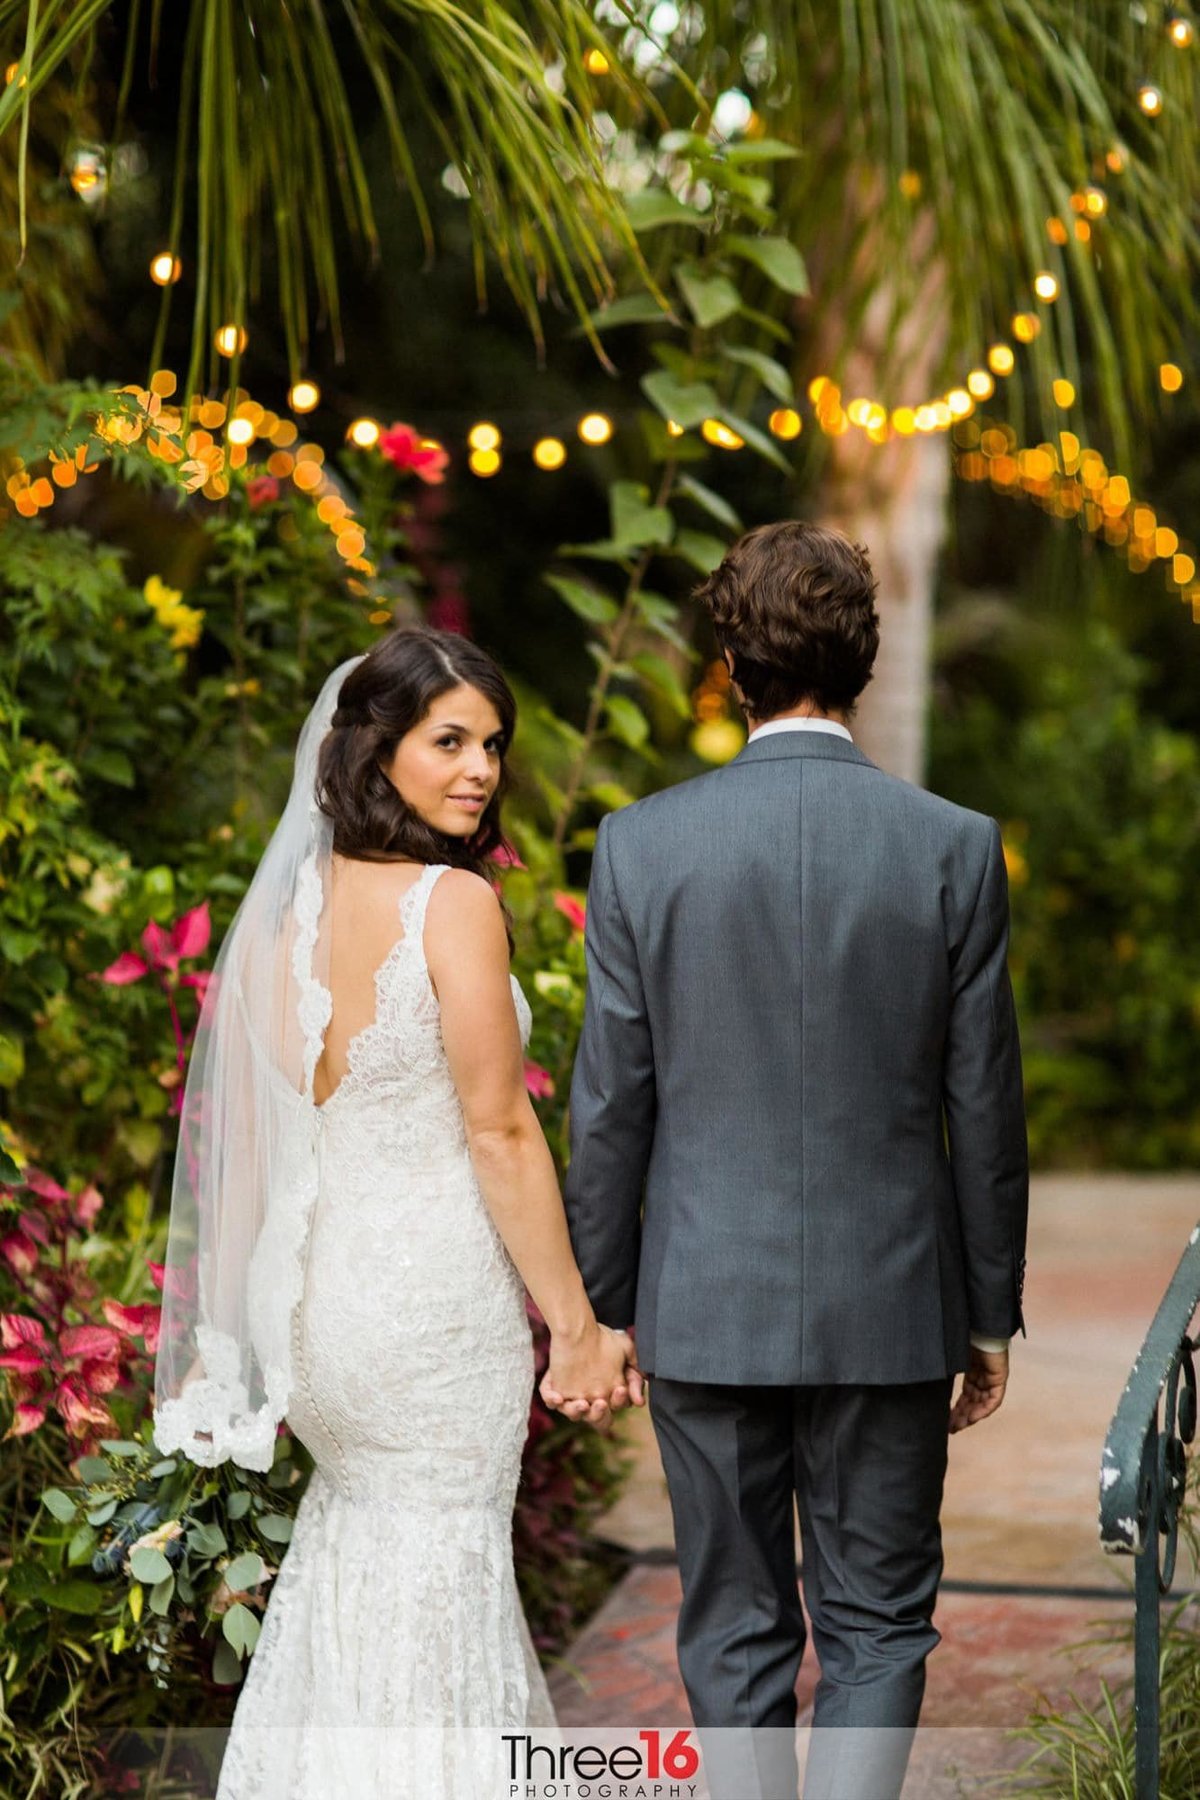 Bride looks back at the camera as the newly married couple walks away holding hands